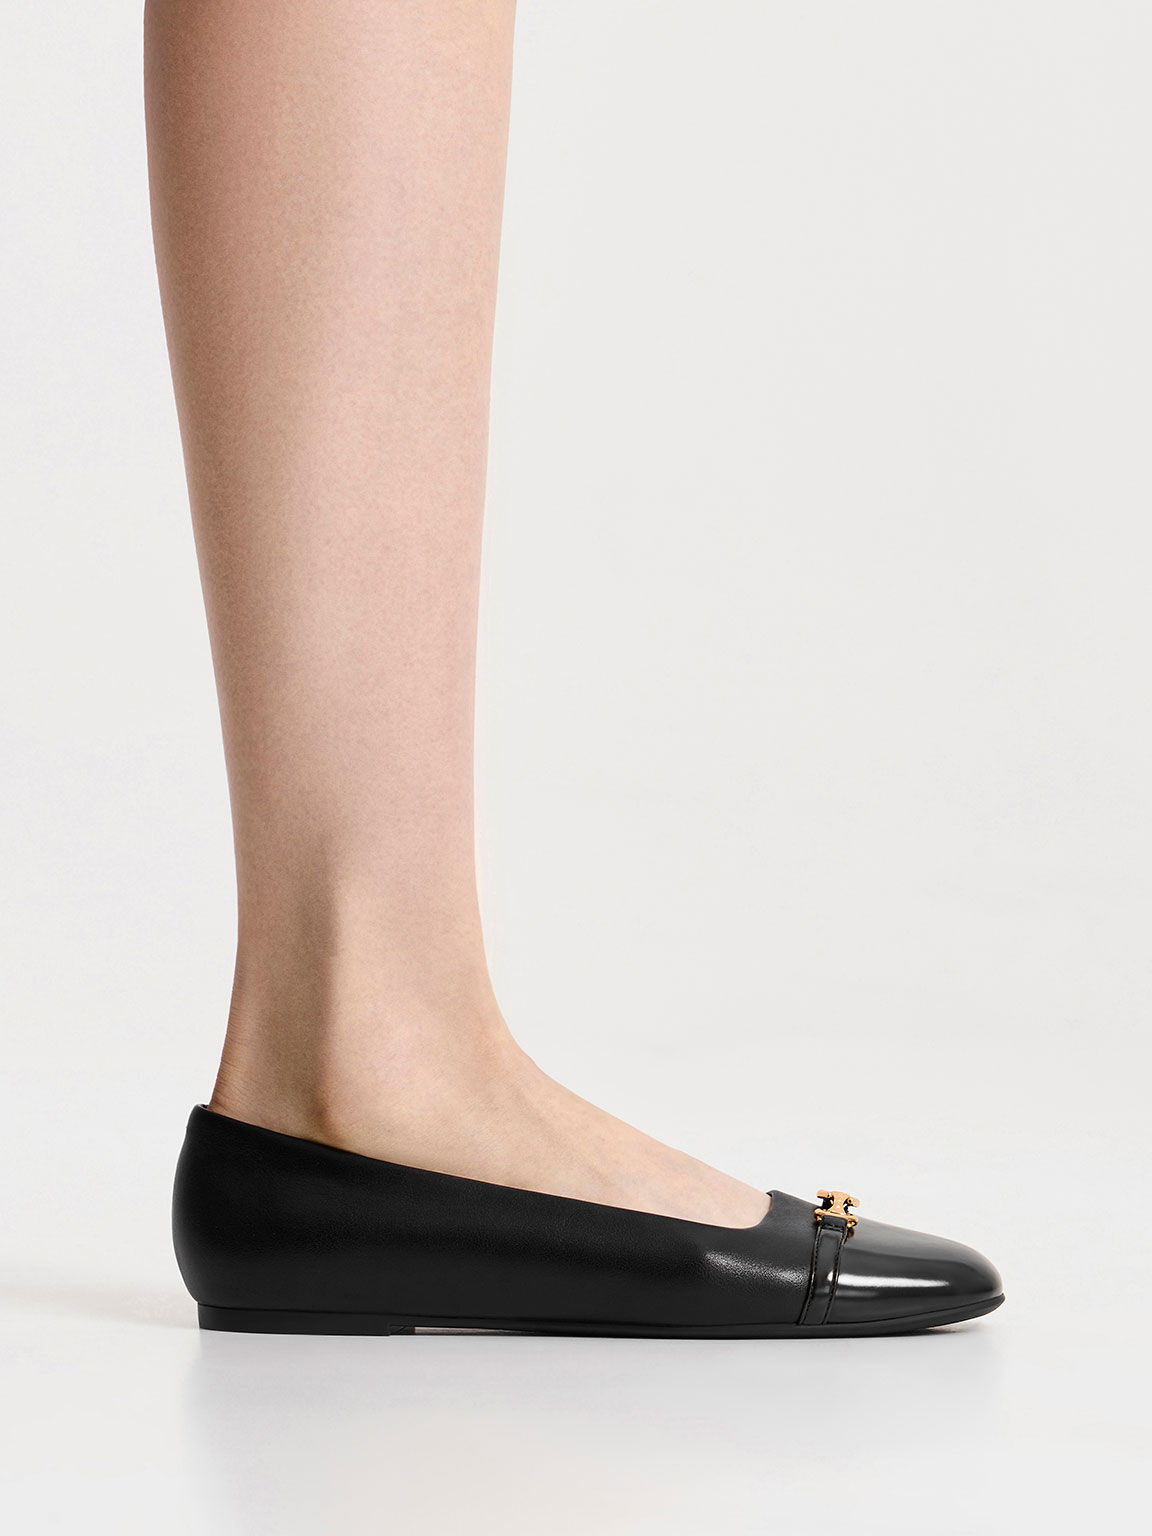 Black Textured Recycled Polyester Bow Ballet Flats - CHARLES